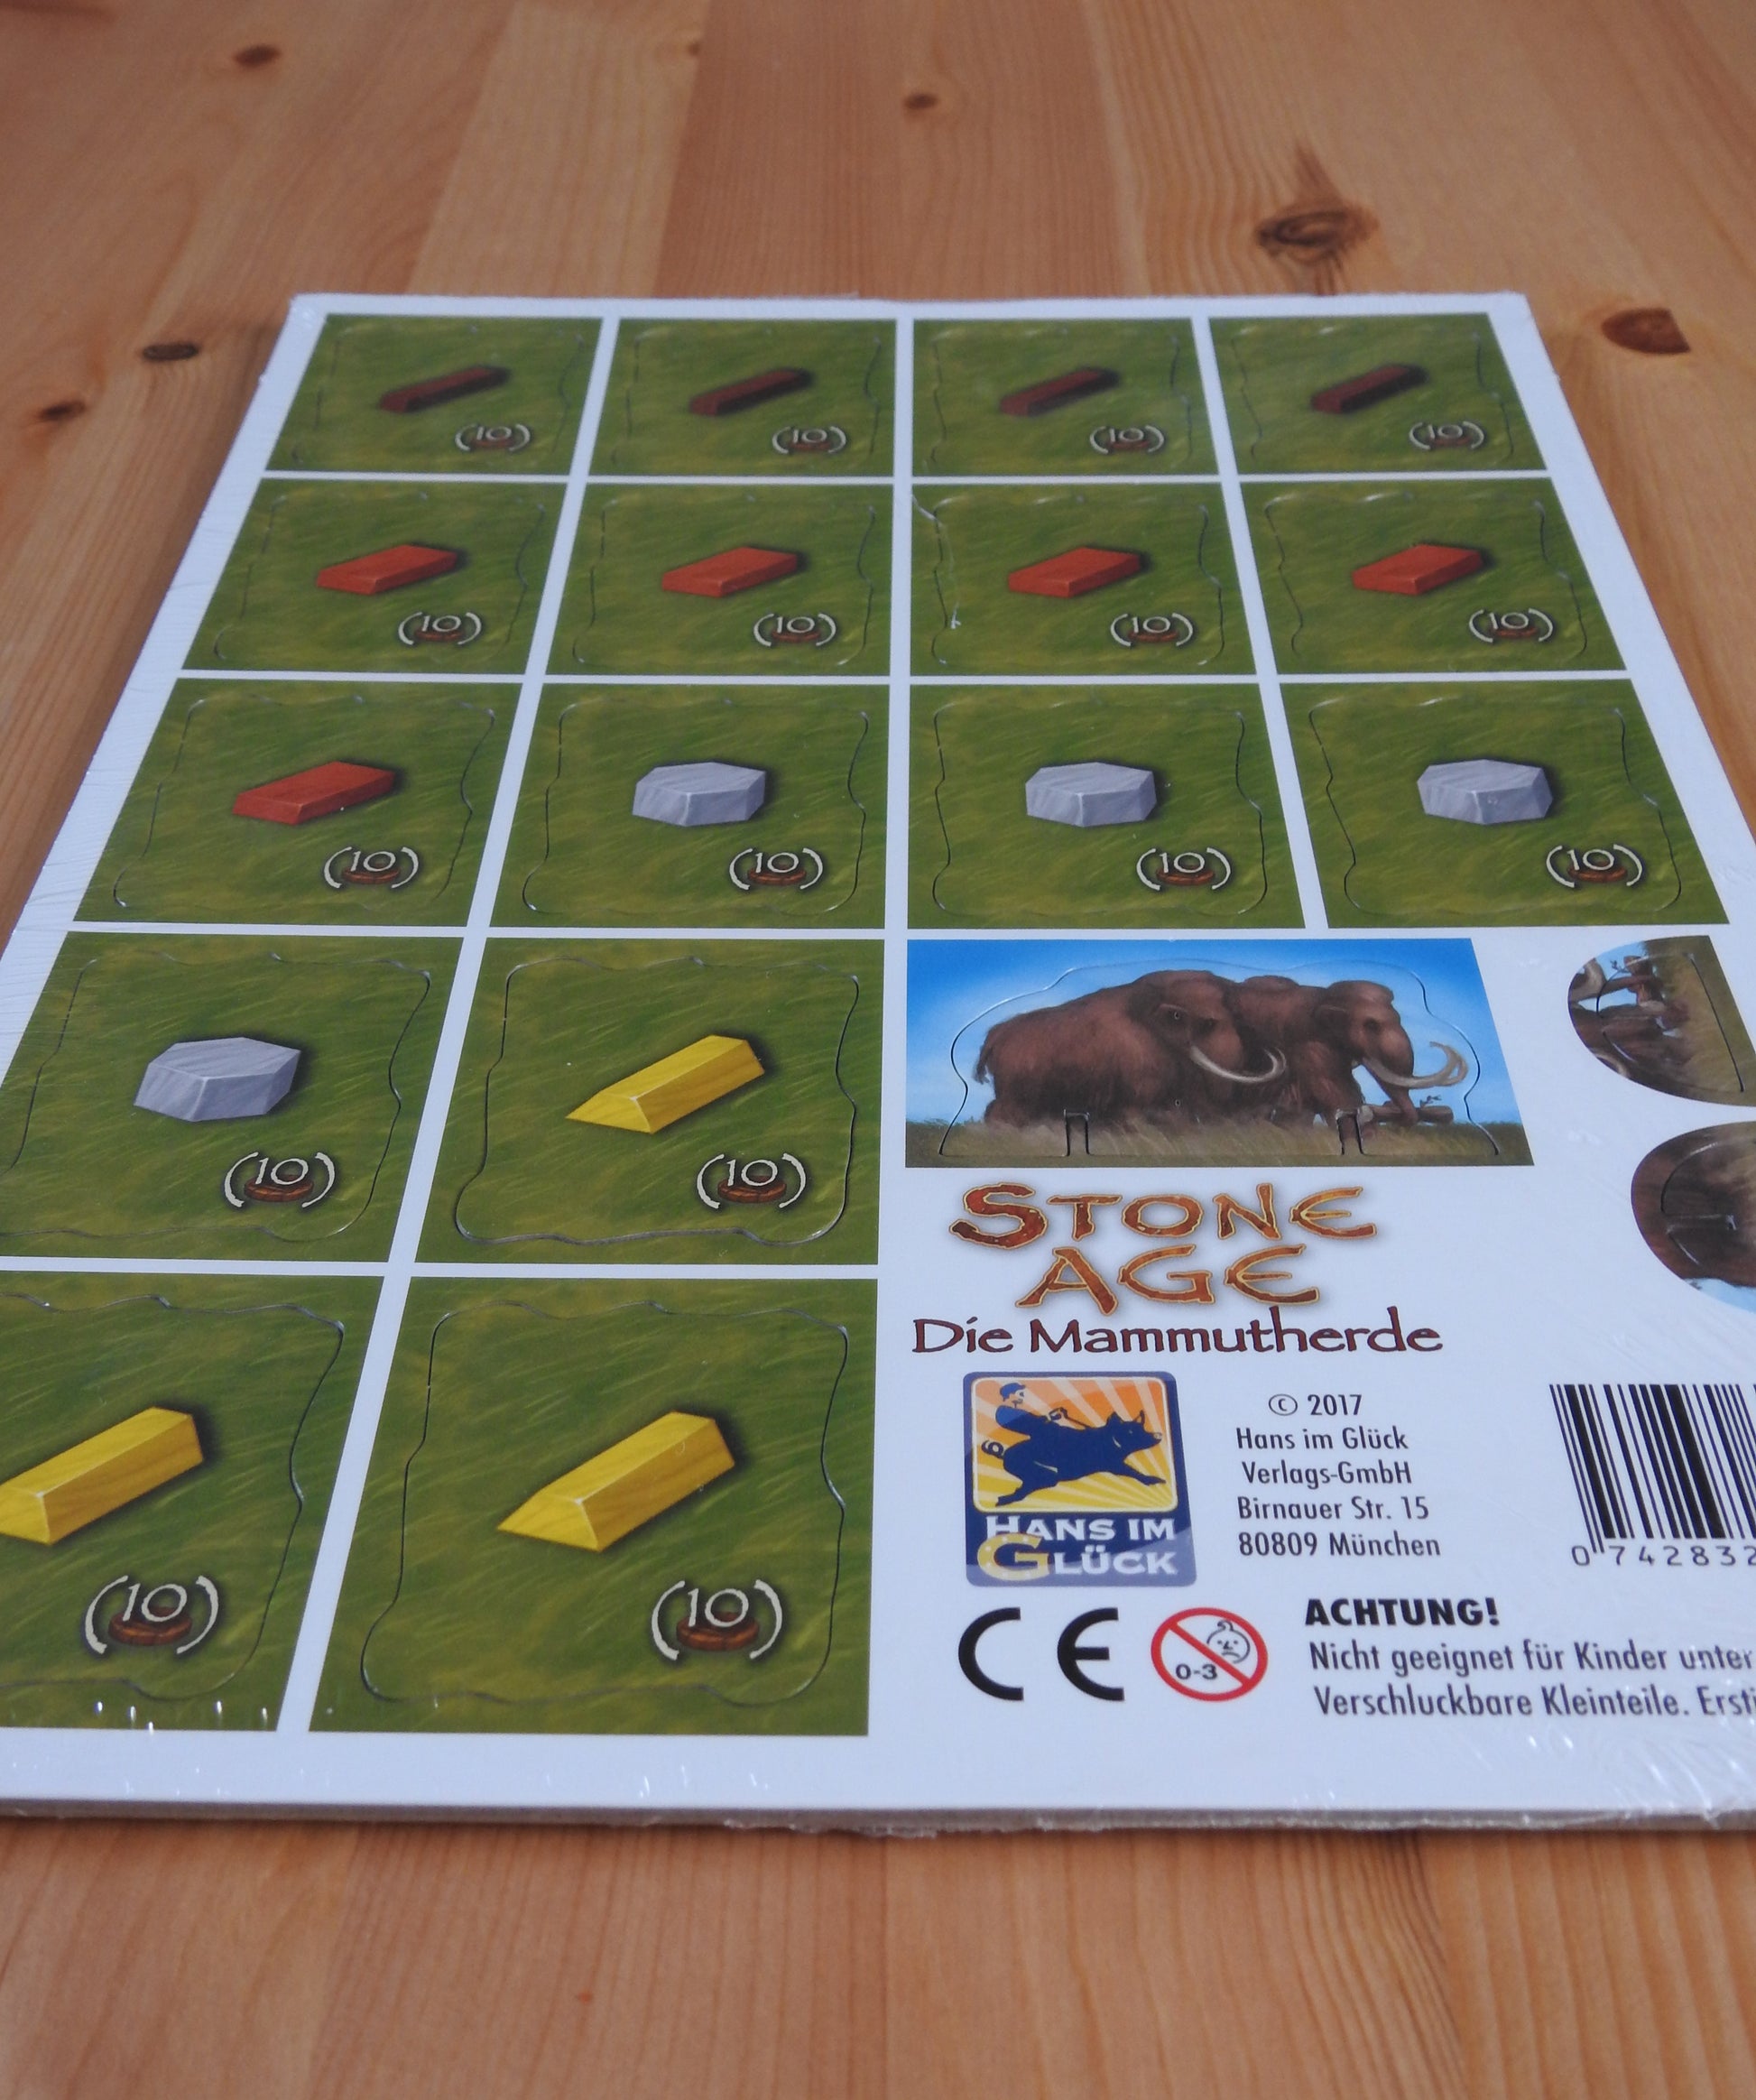 Long view of the tiles and pieces included in this mini expansion.